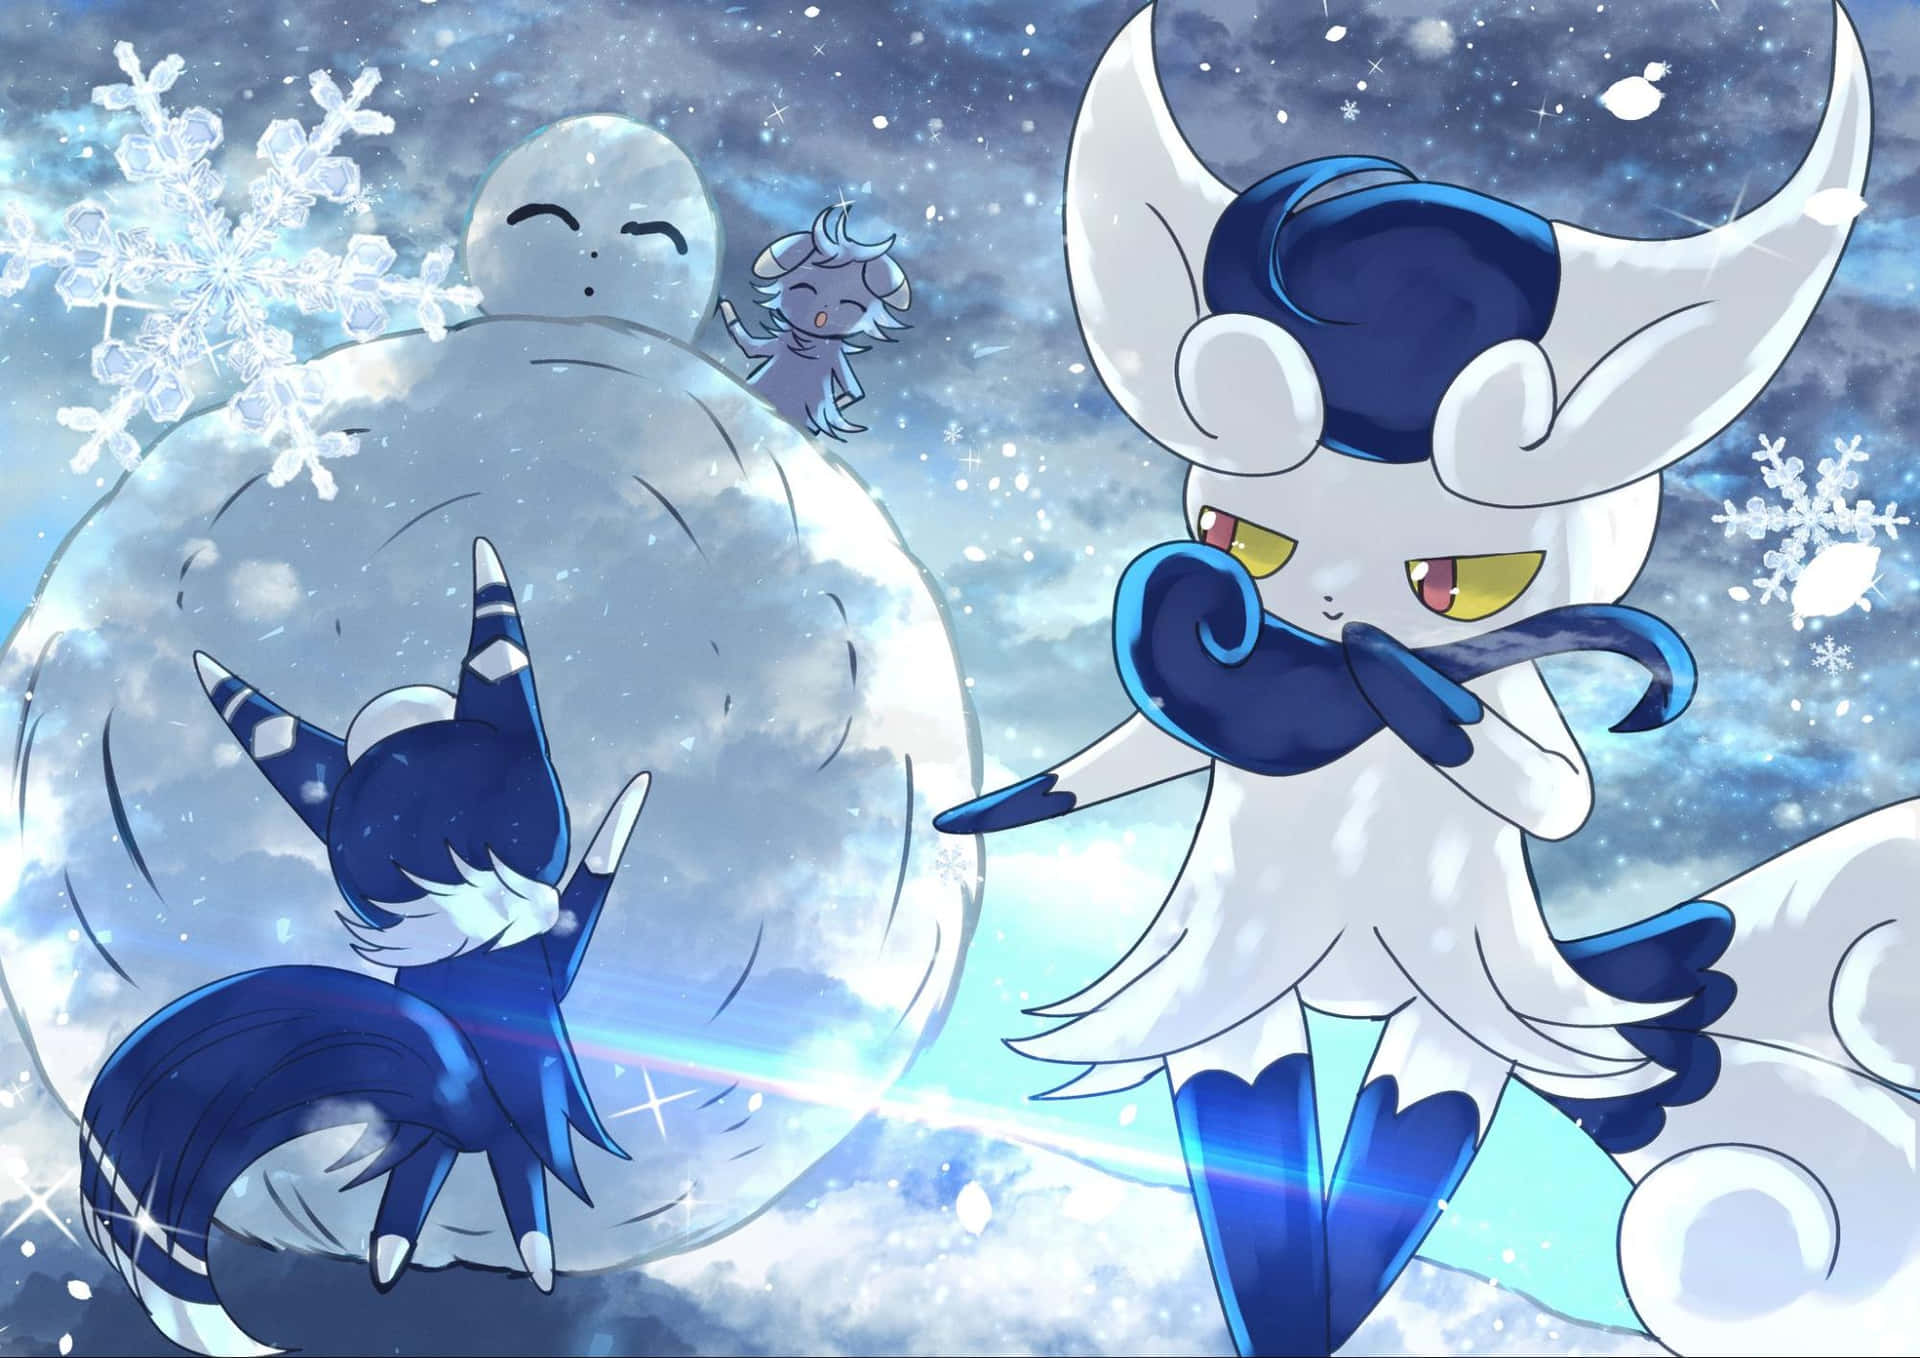 Final Forms Of Espurr In Snow Wallpaper